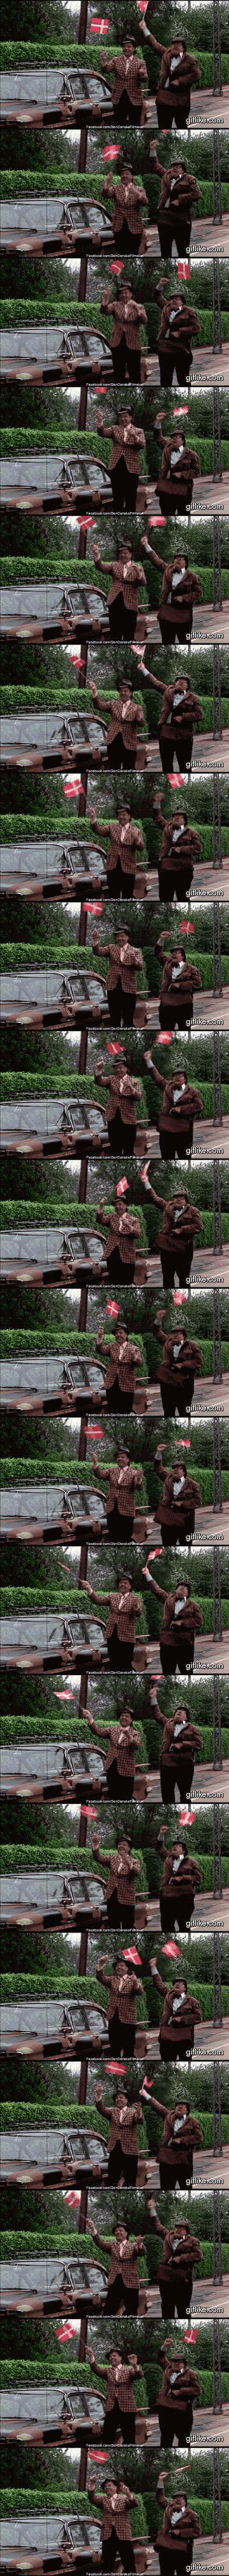 A GIF from the movie Olsen Banden, two men waving with flags in celebration